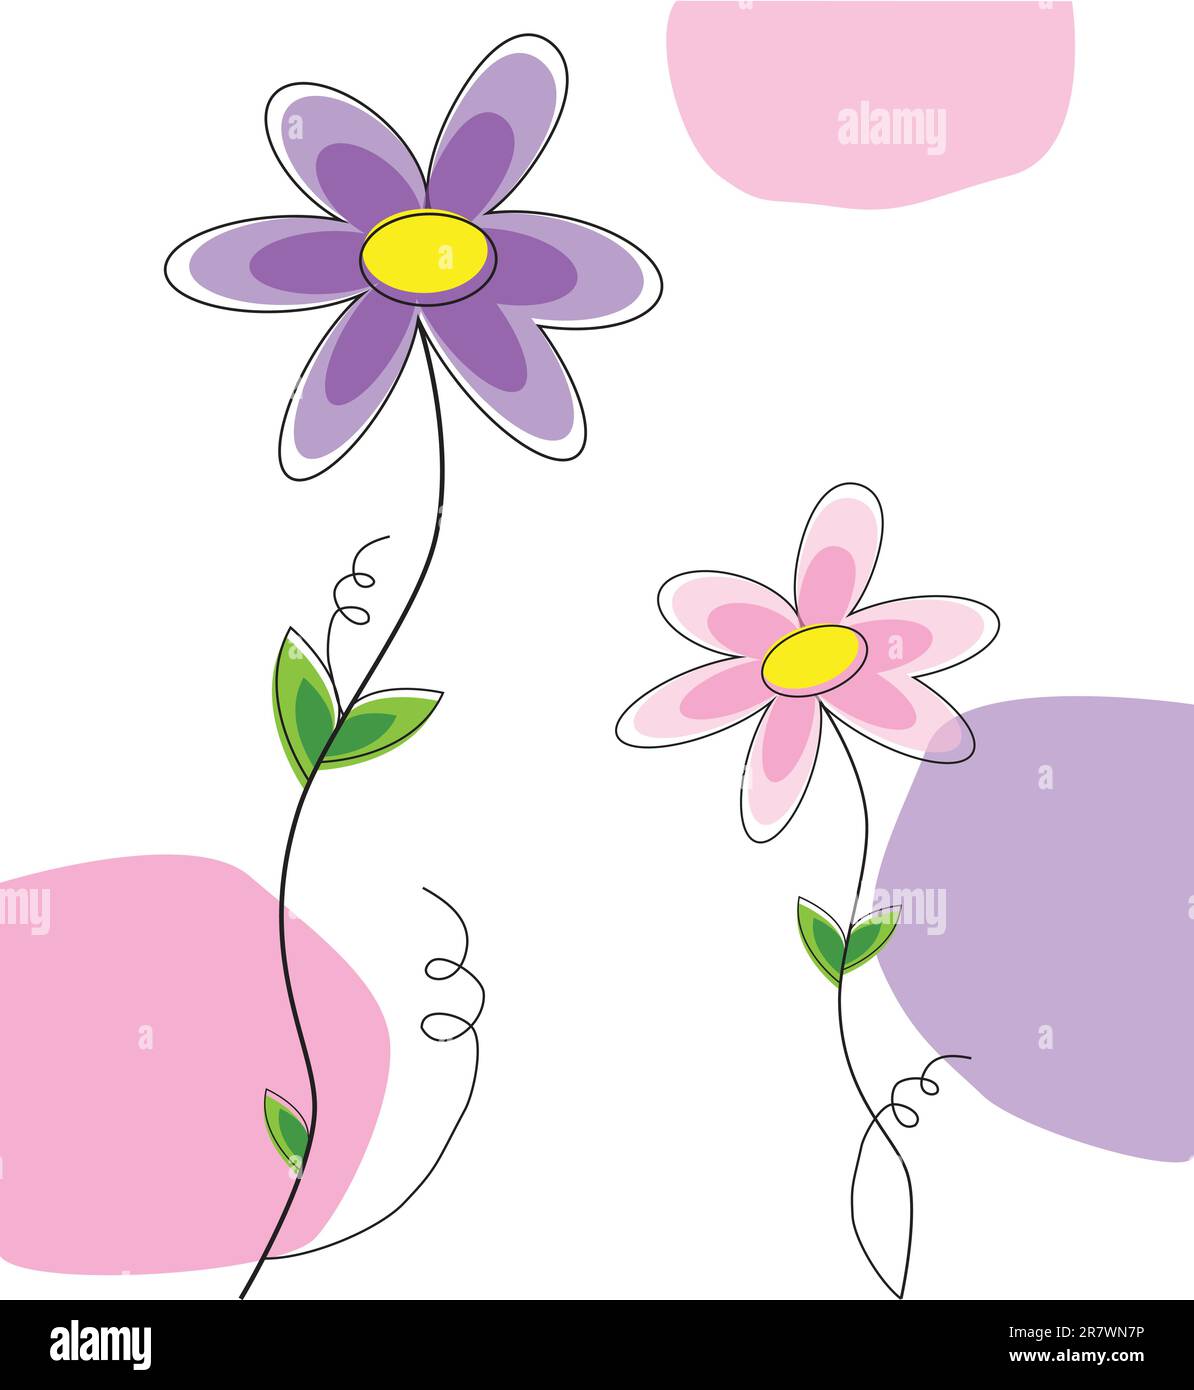 Cute pink and purple spring summer daisy flowers Stock Vector